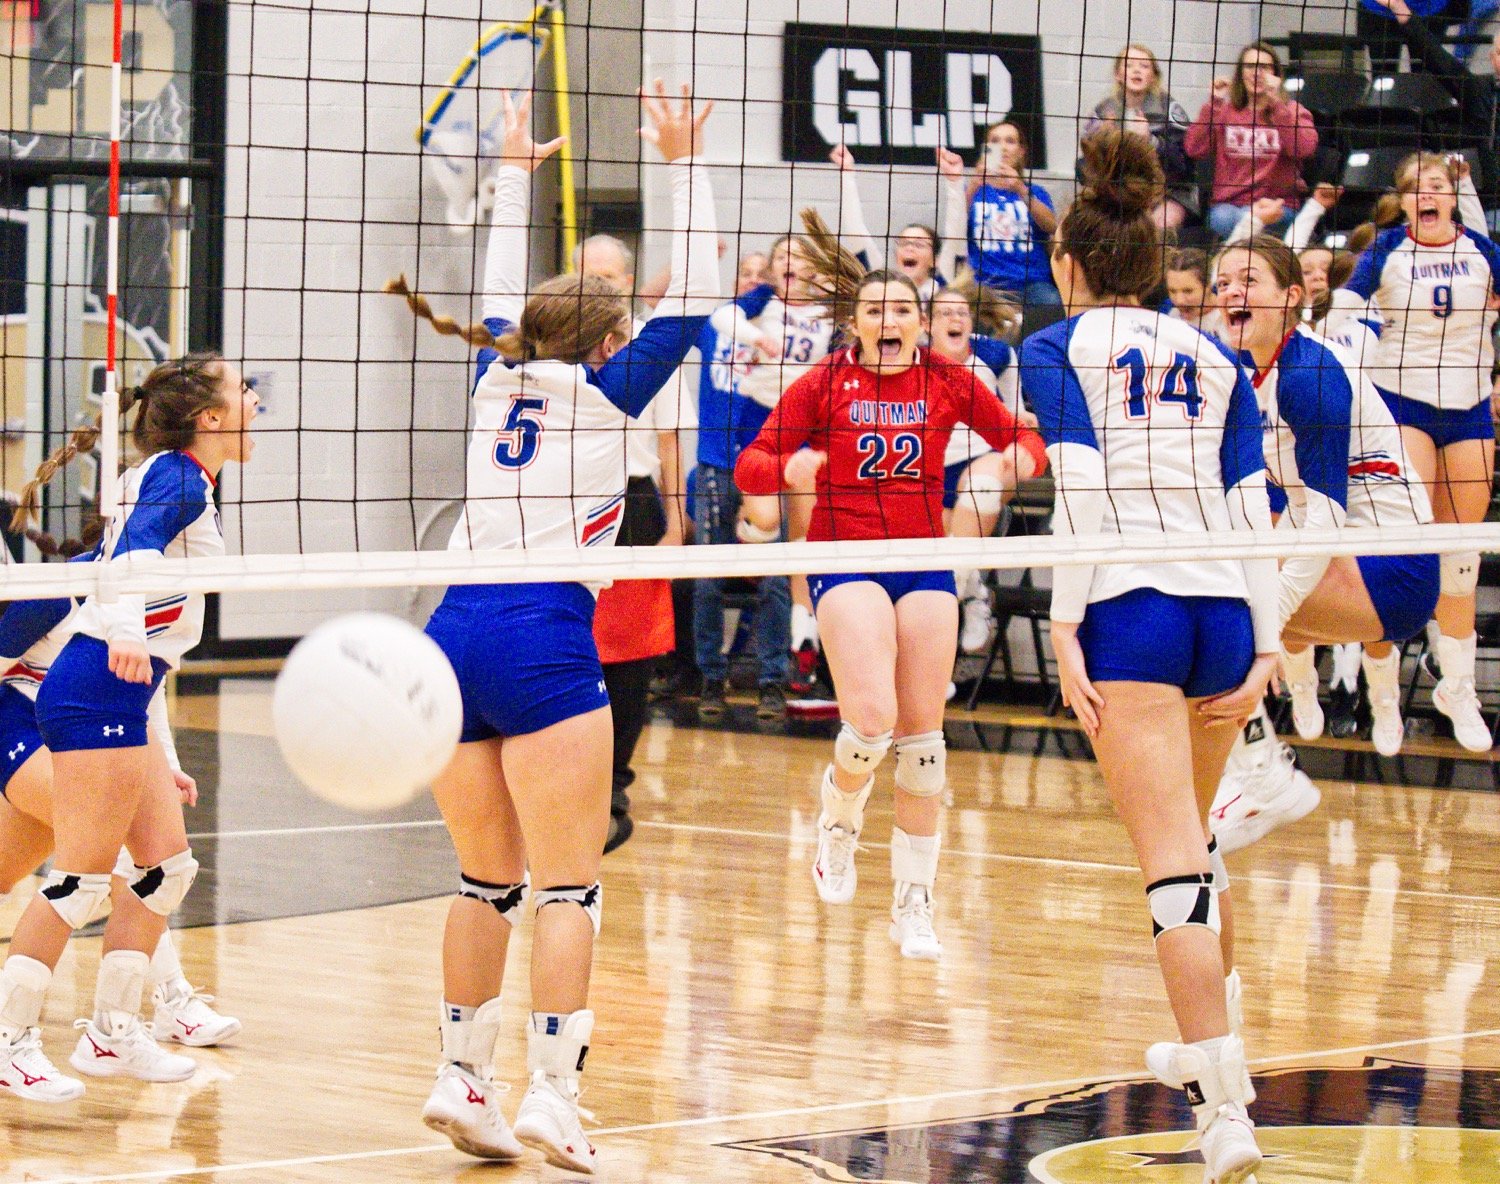 The Lady Bulldogs react to winning match point, prevailing over Redwater to claim a bi-district title. [See the entire set of photos.]